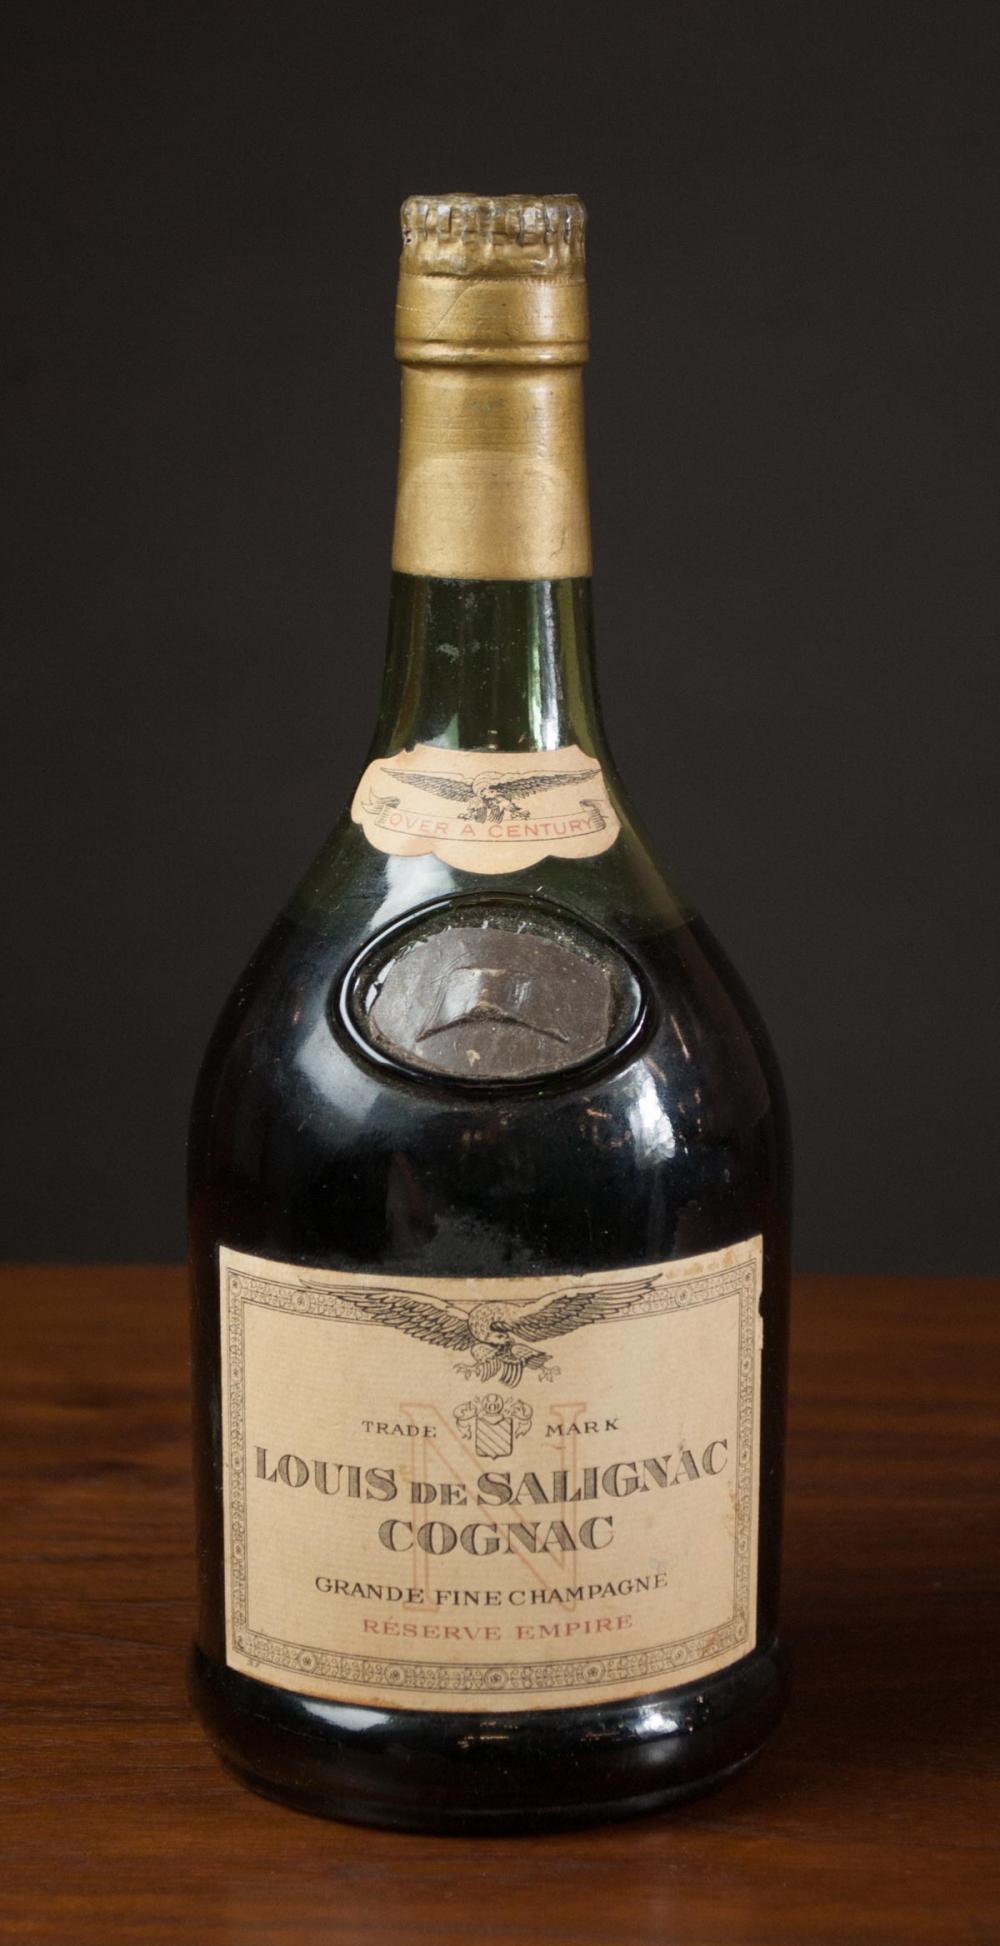 AN EARLY BOTTLE OF FRENCH COGNAC  314c12